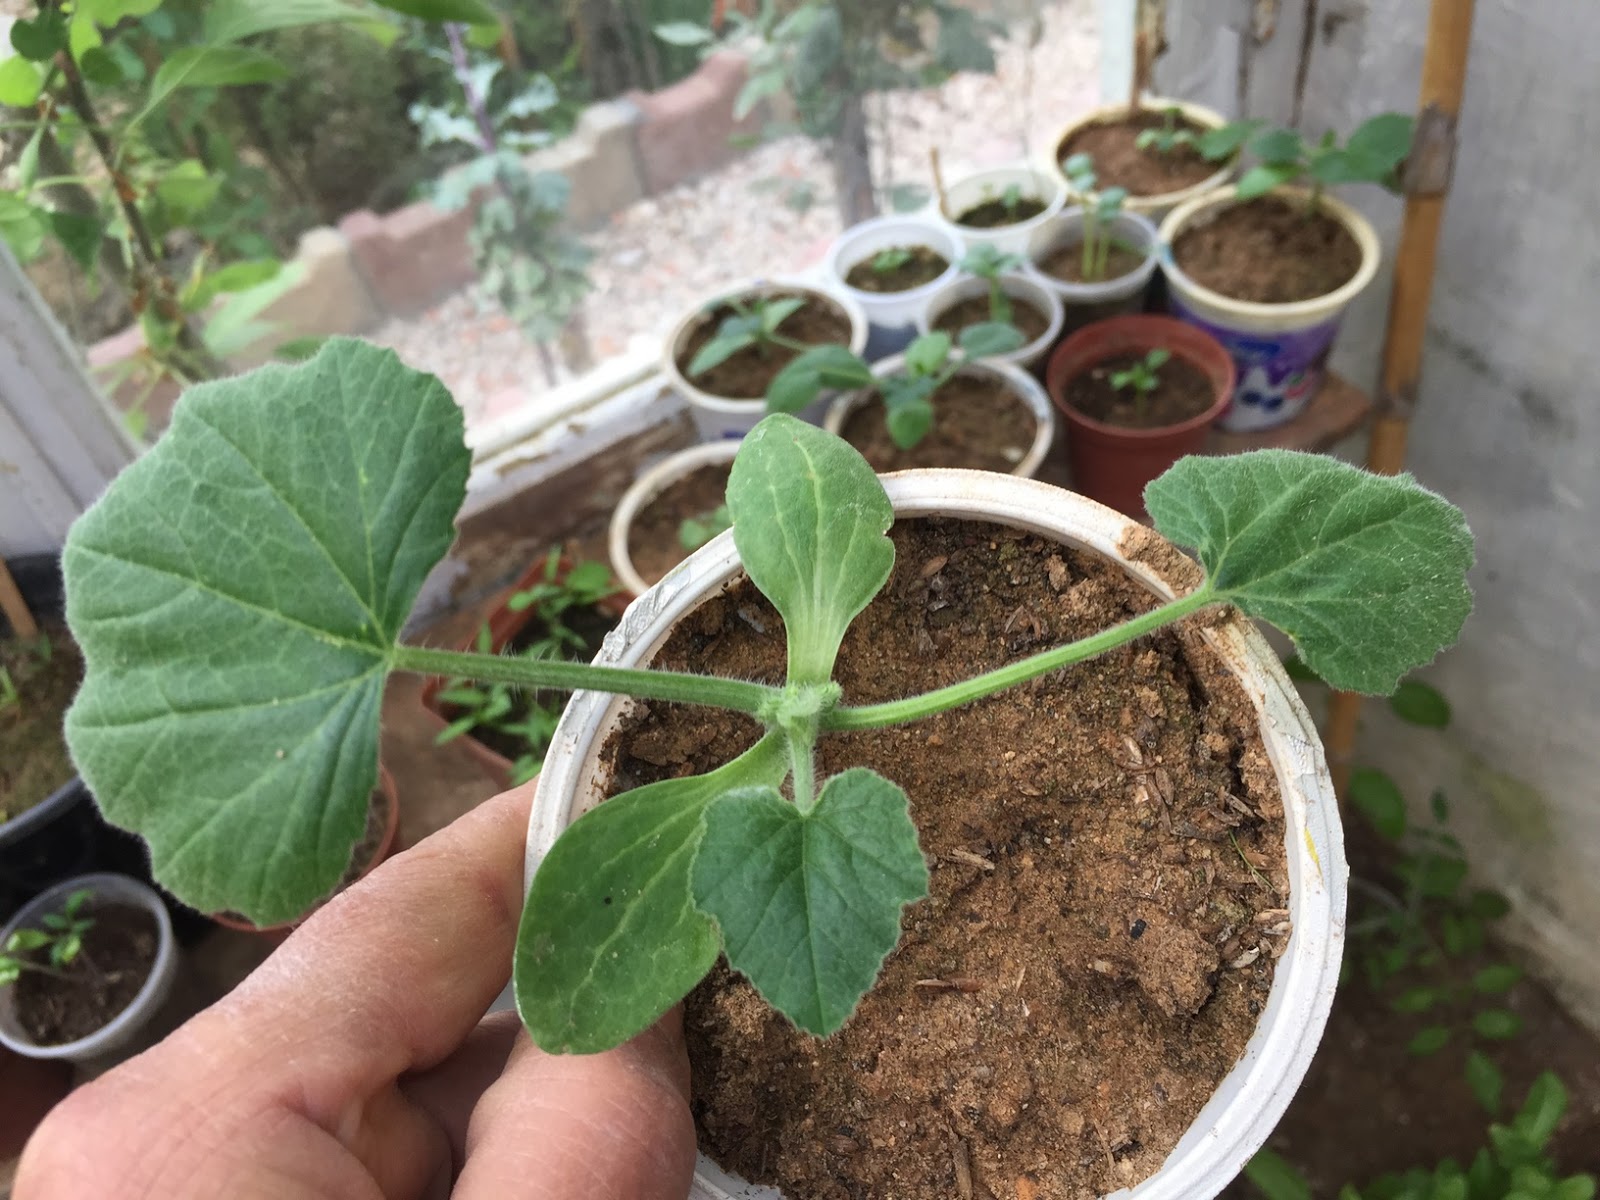 Healthy seeds produce strong, robust seedlings that are better equipped to withstand environmental stresses and develop into productive zucchini plants.